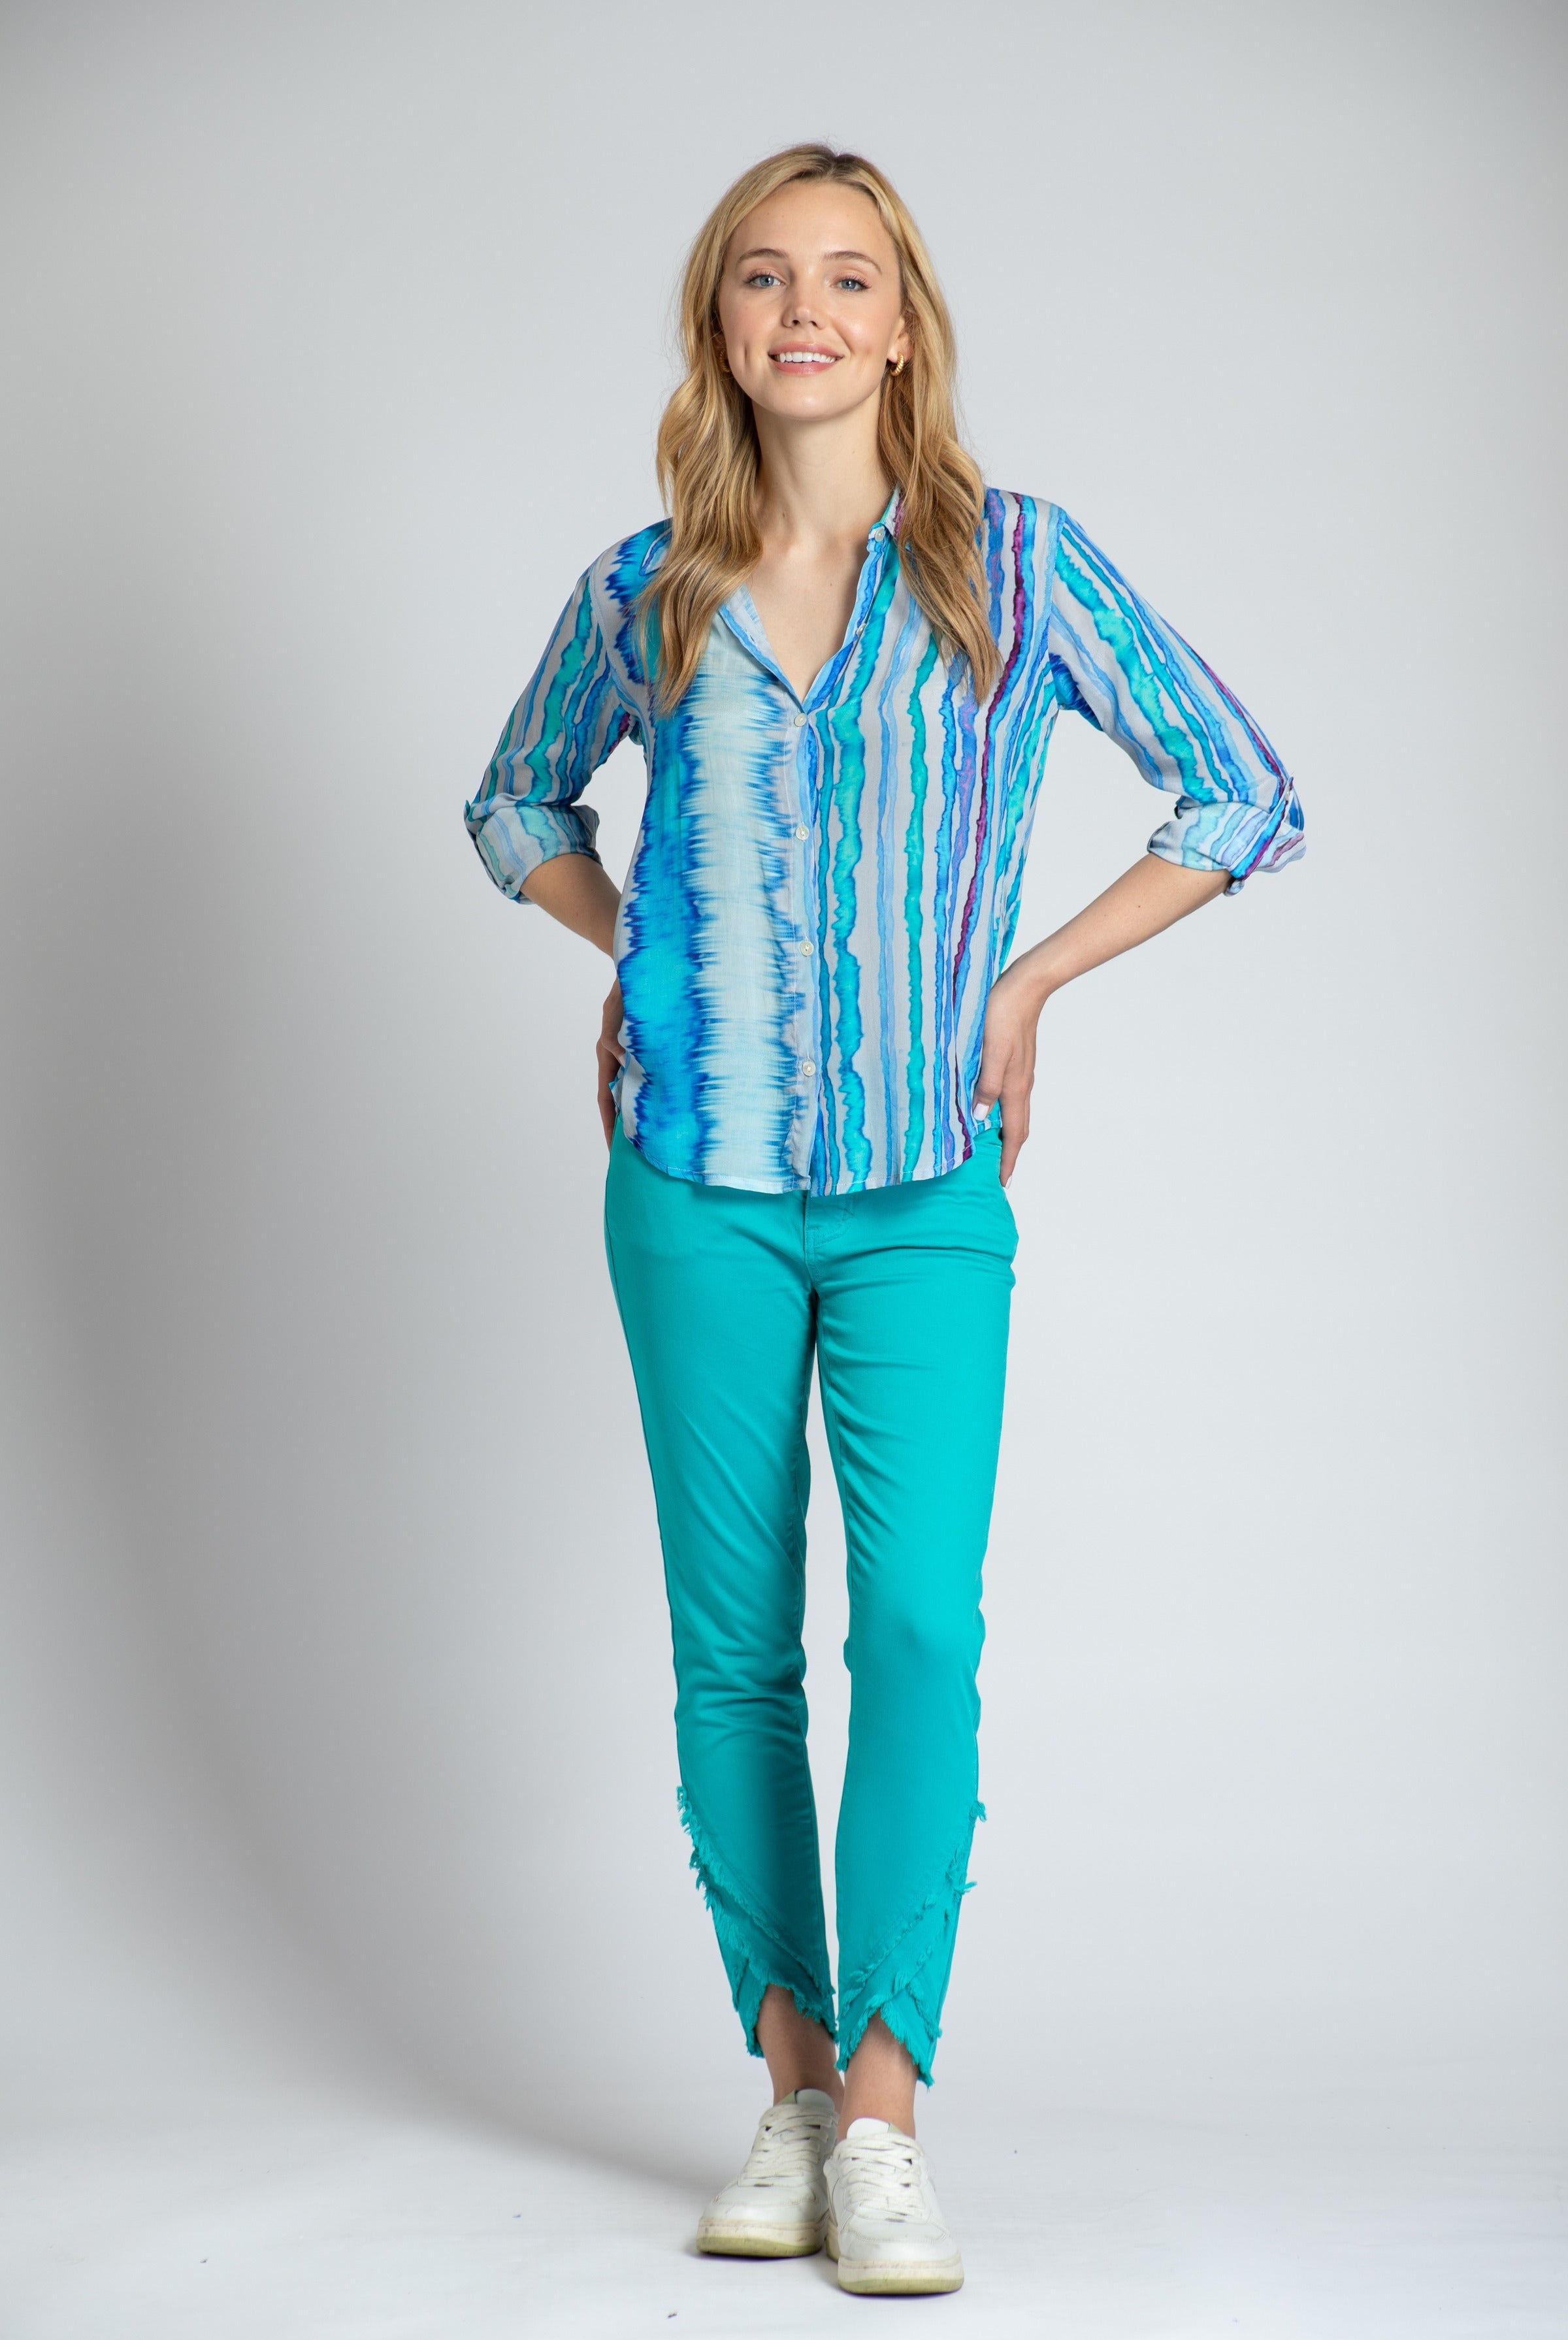  Coastal Horizon Hues - Button-up With Roll-up Sleeve